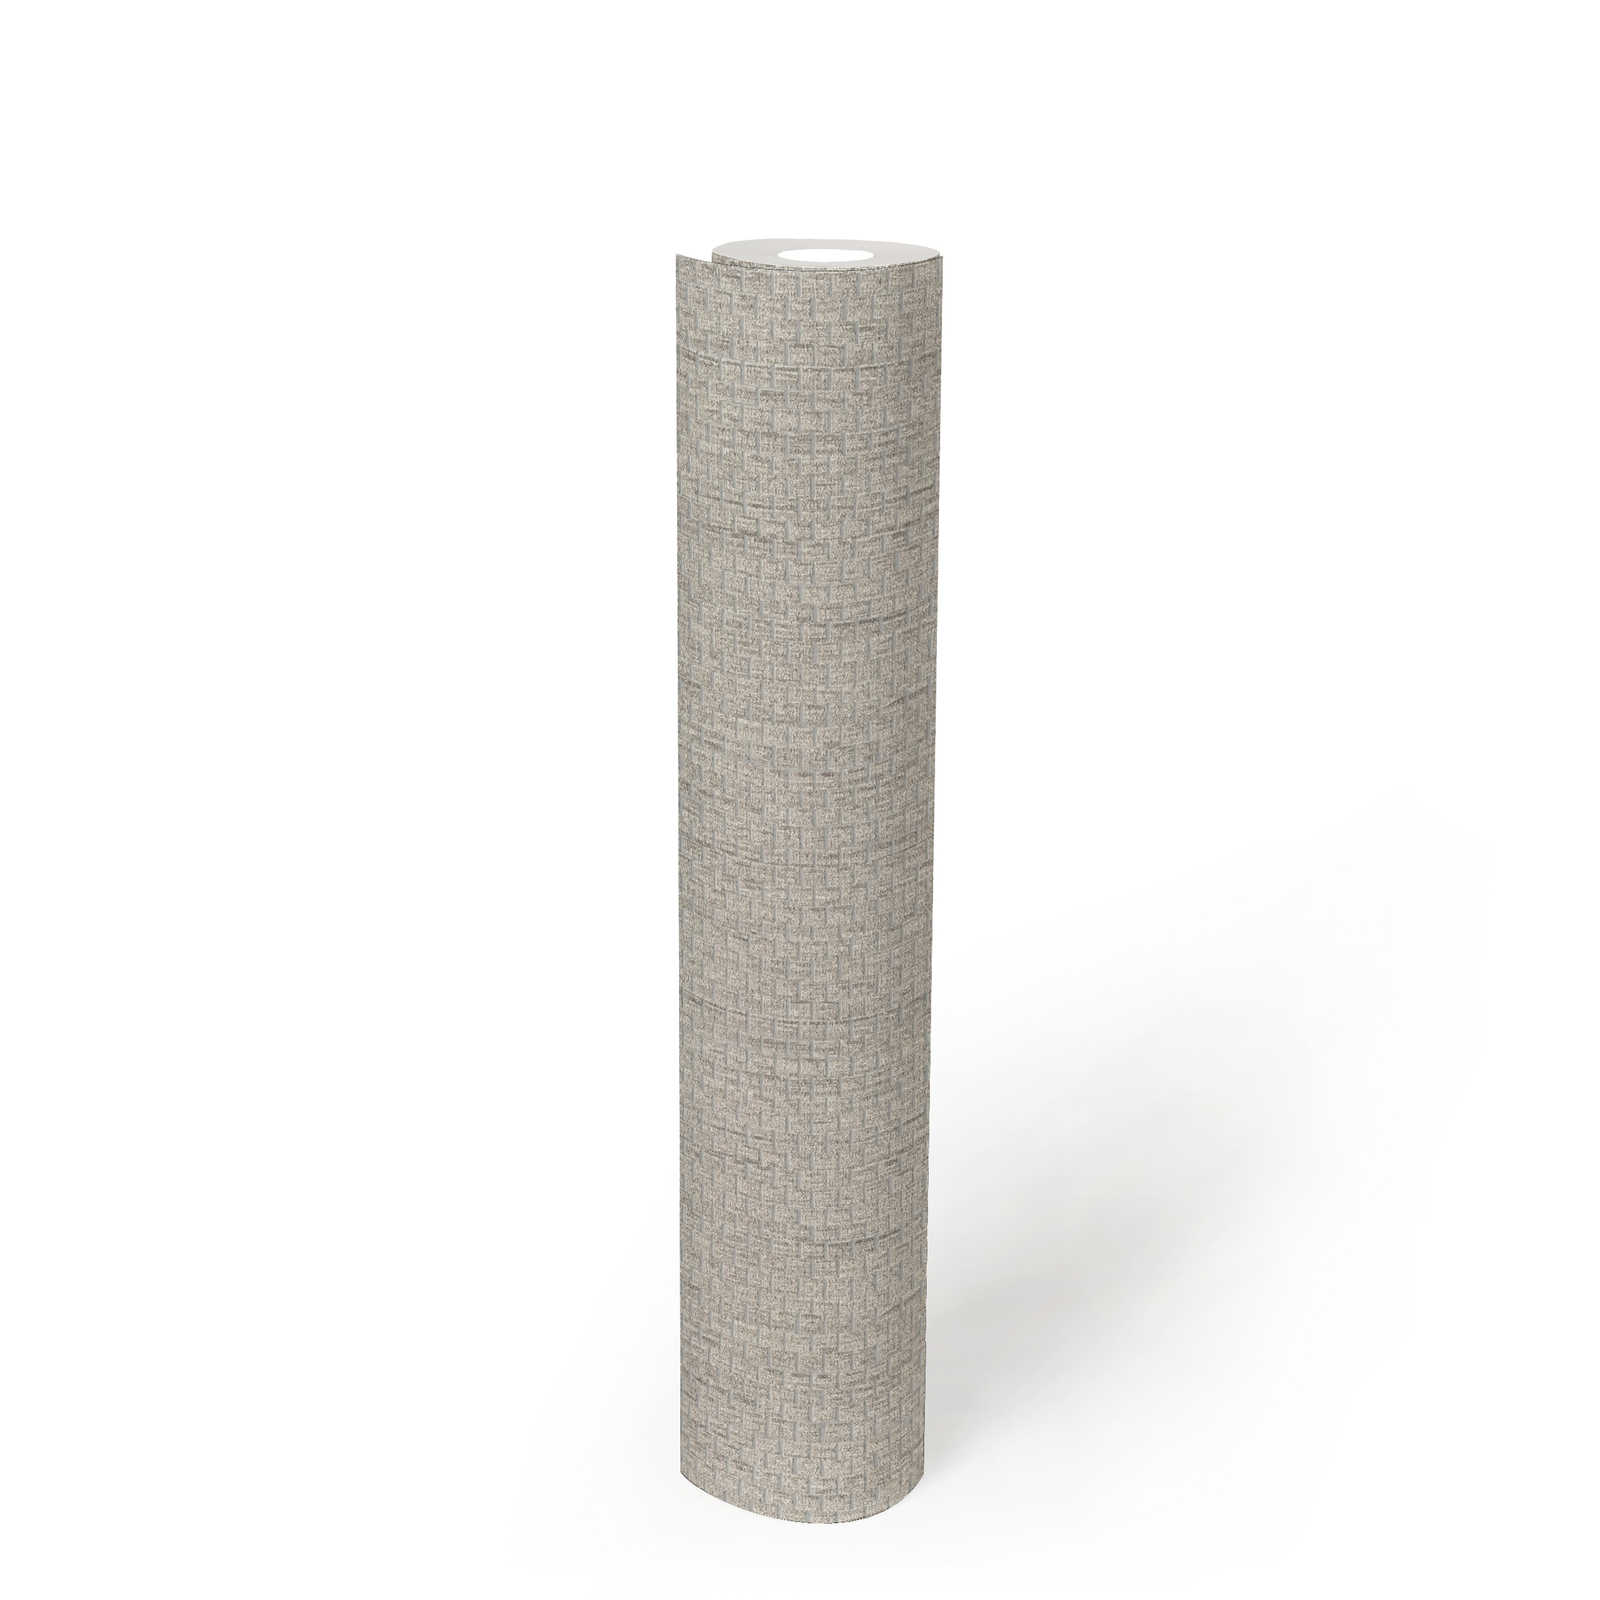             Wallpaper with raffia natural fabric pattern - grey
        